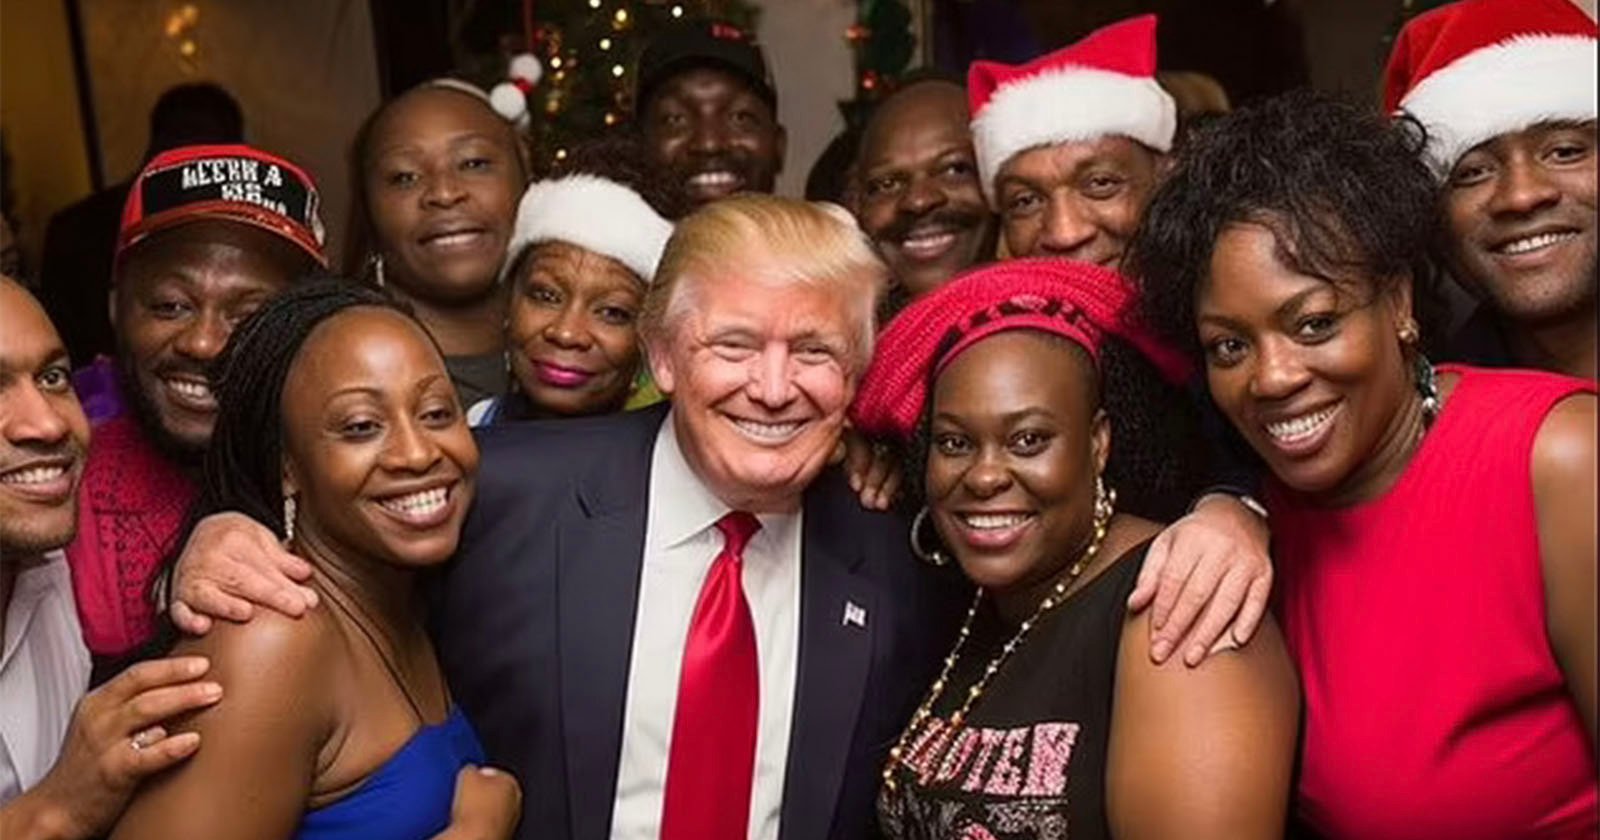 AI Images of Trump With Black People are Being Circulated by His Supporters